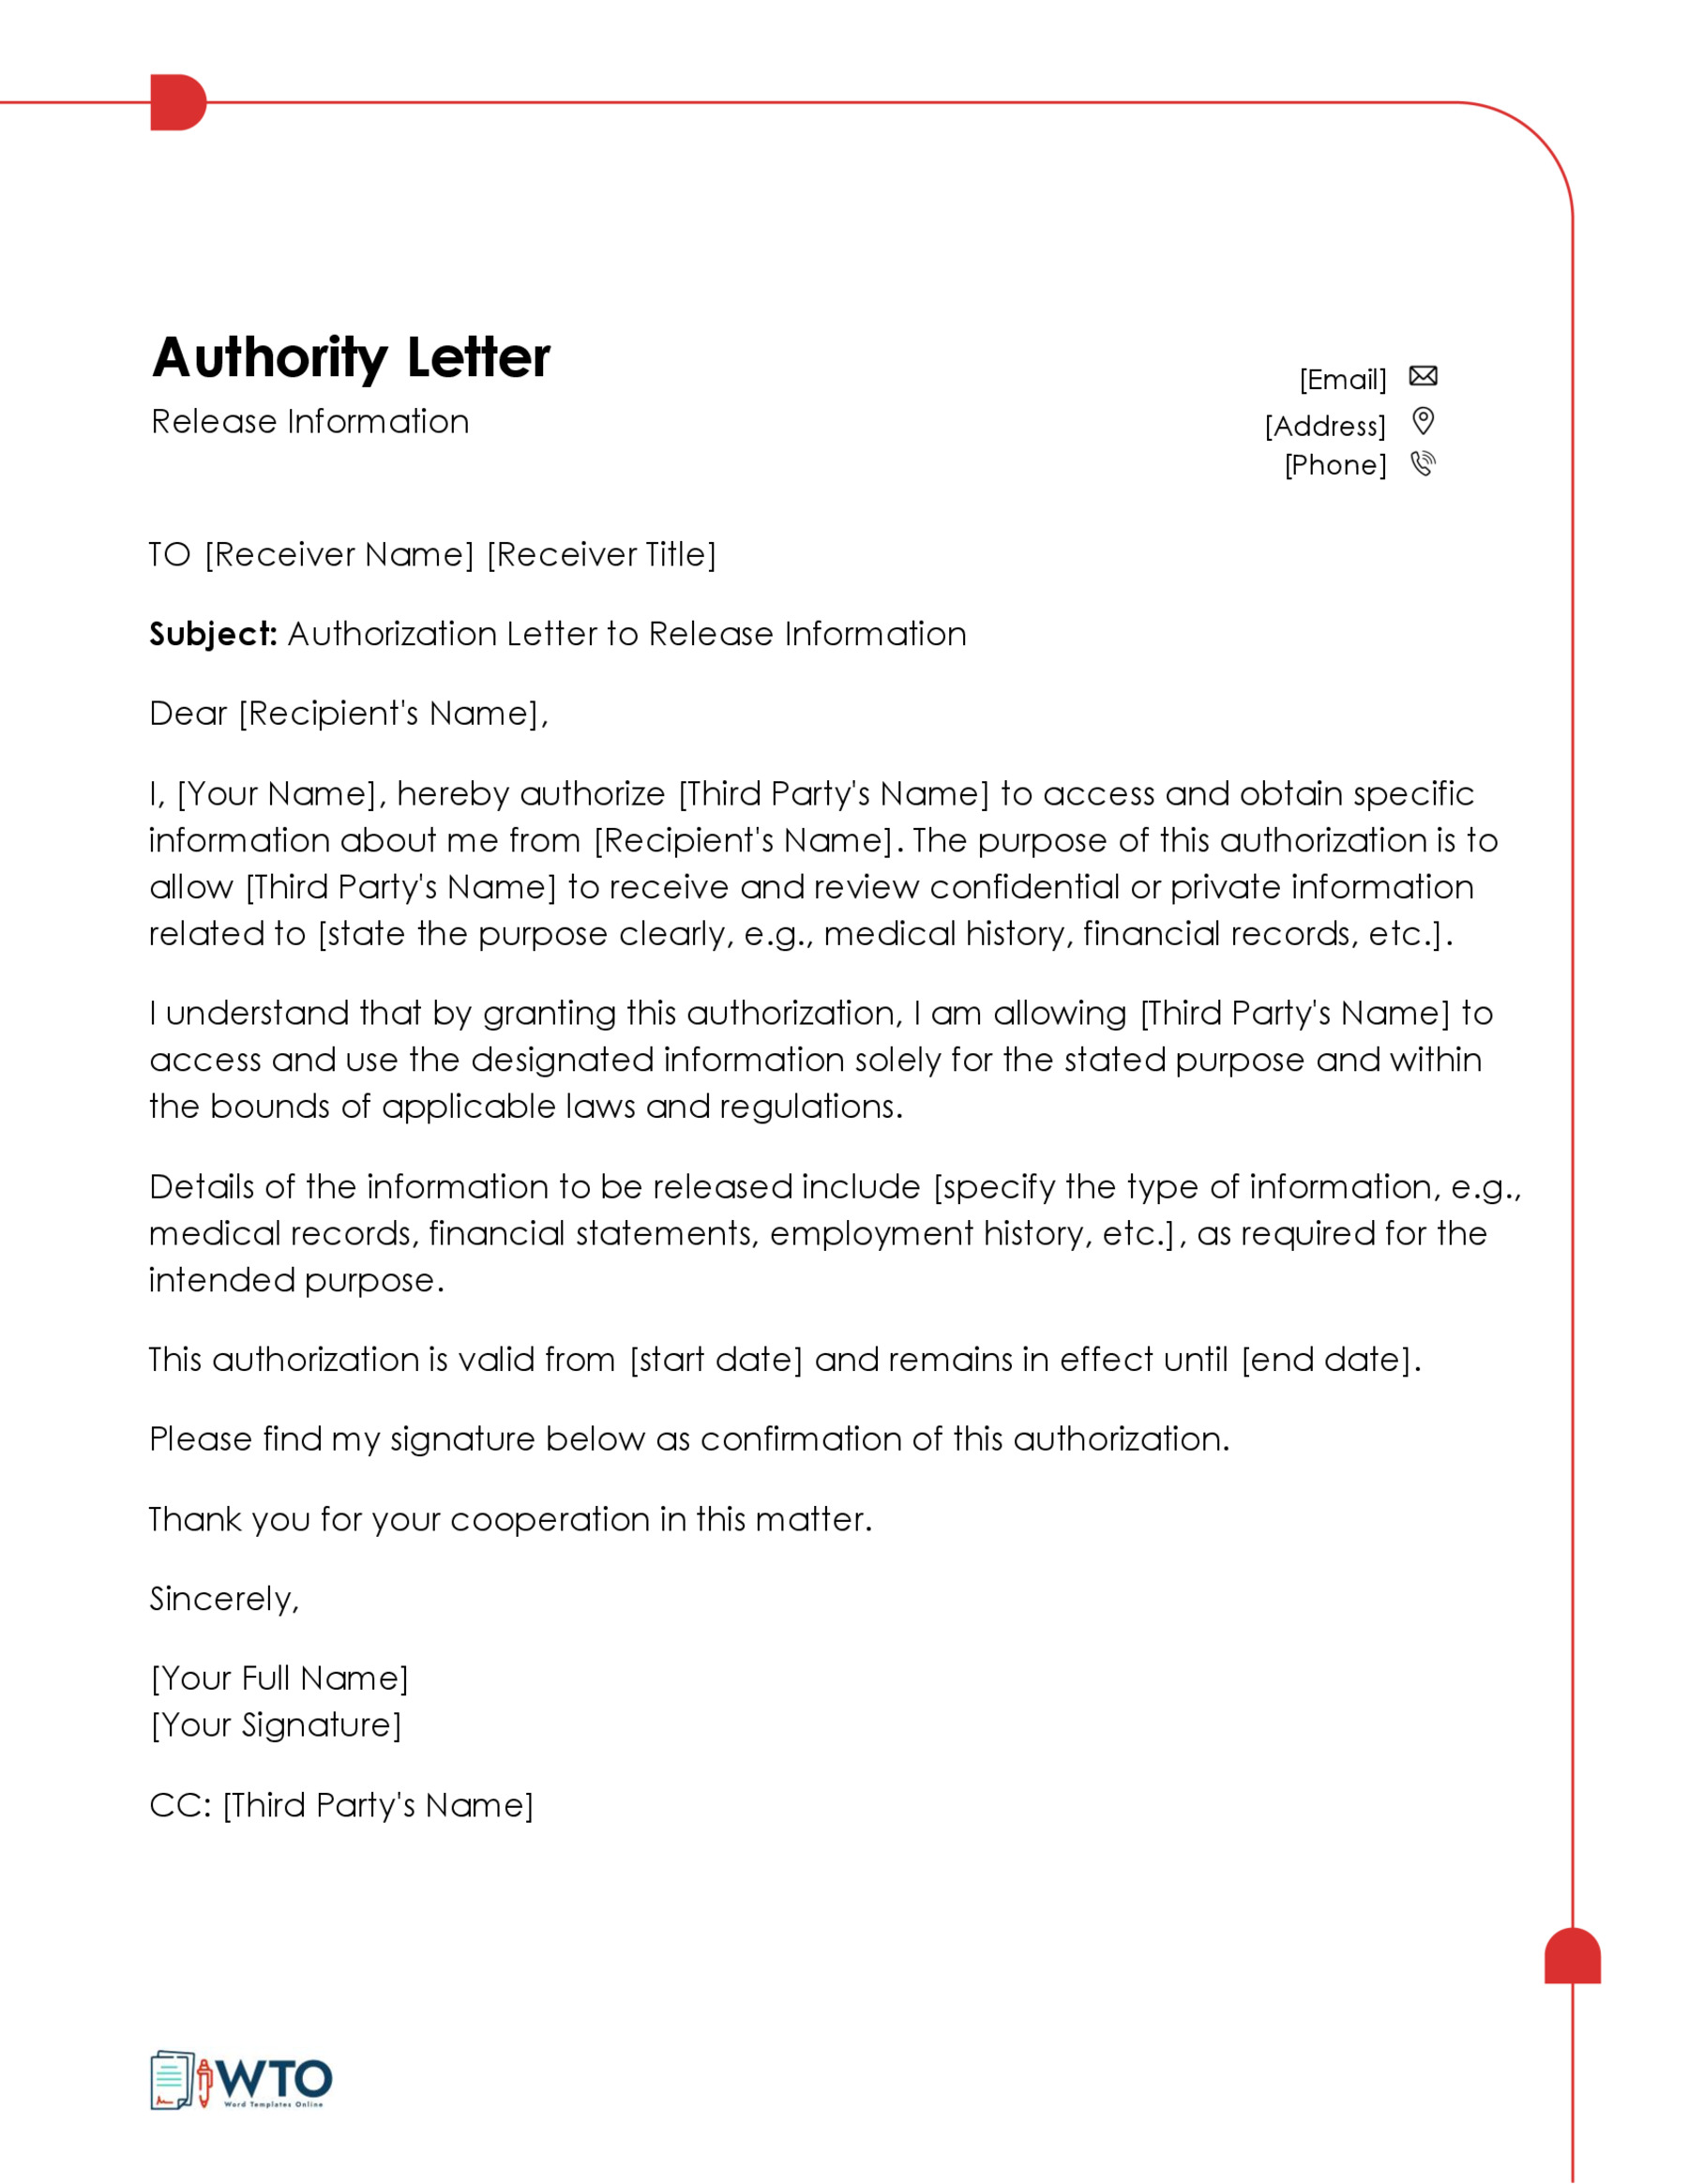 Authorization Letter to Release Personal Information Template - Free Download